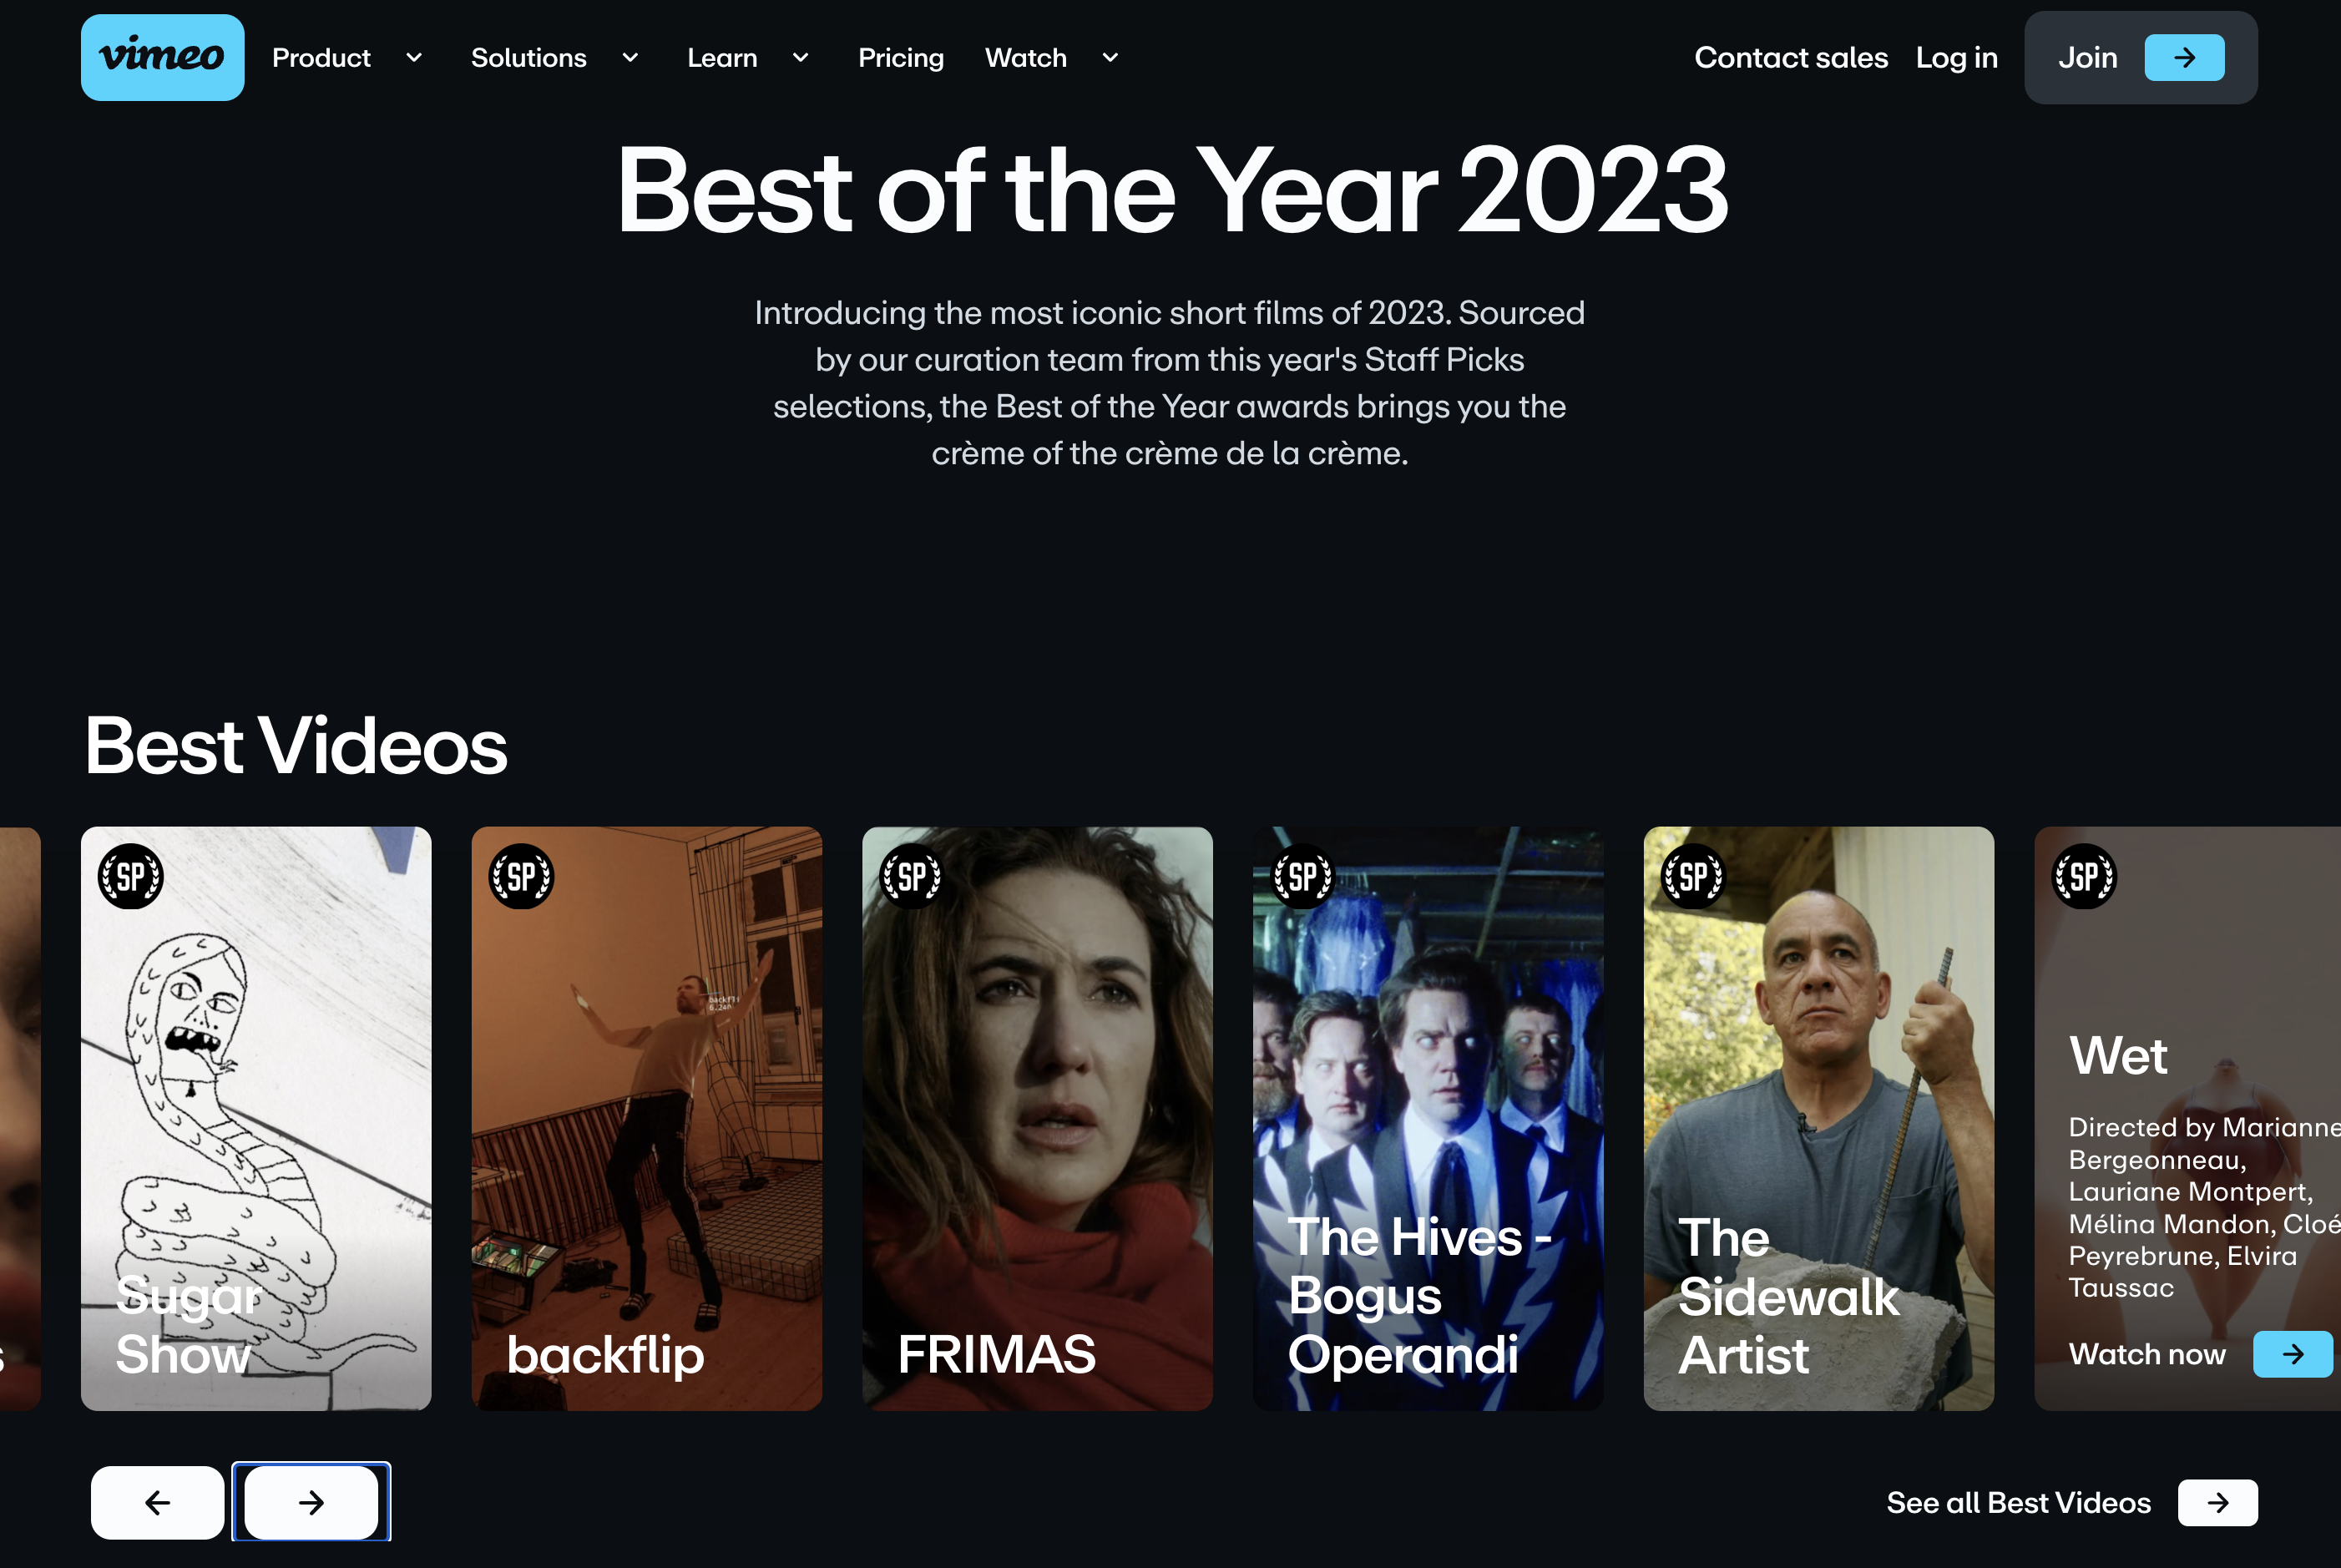 Vimeo Best of the Year 2023